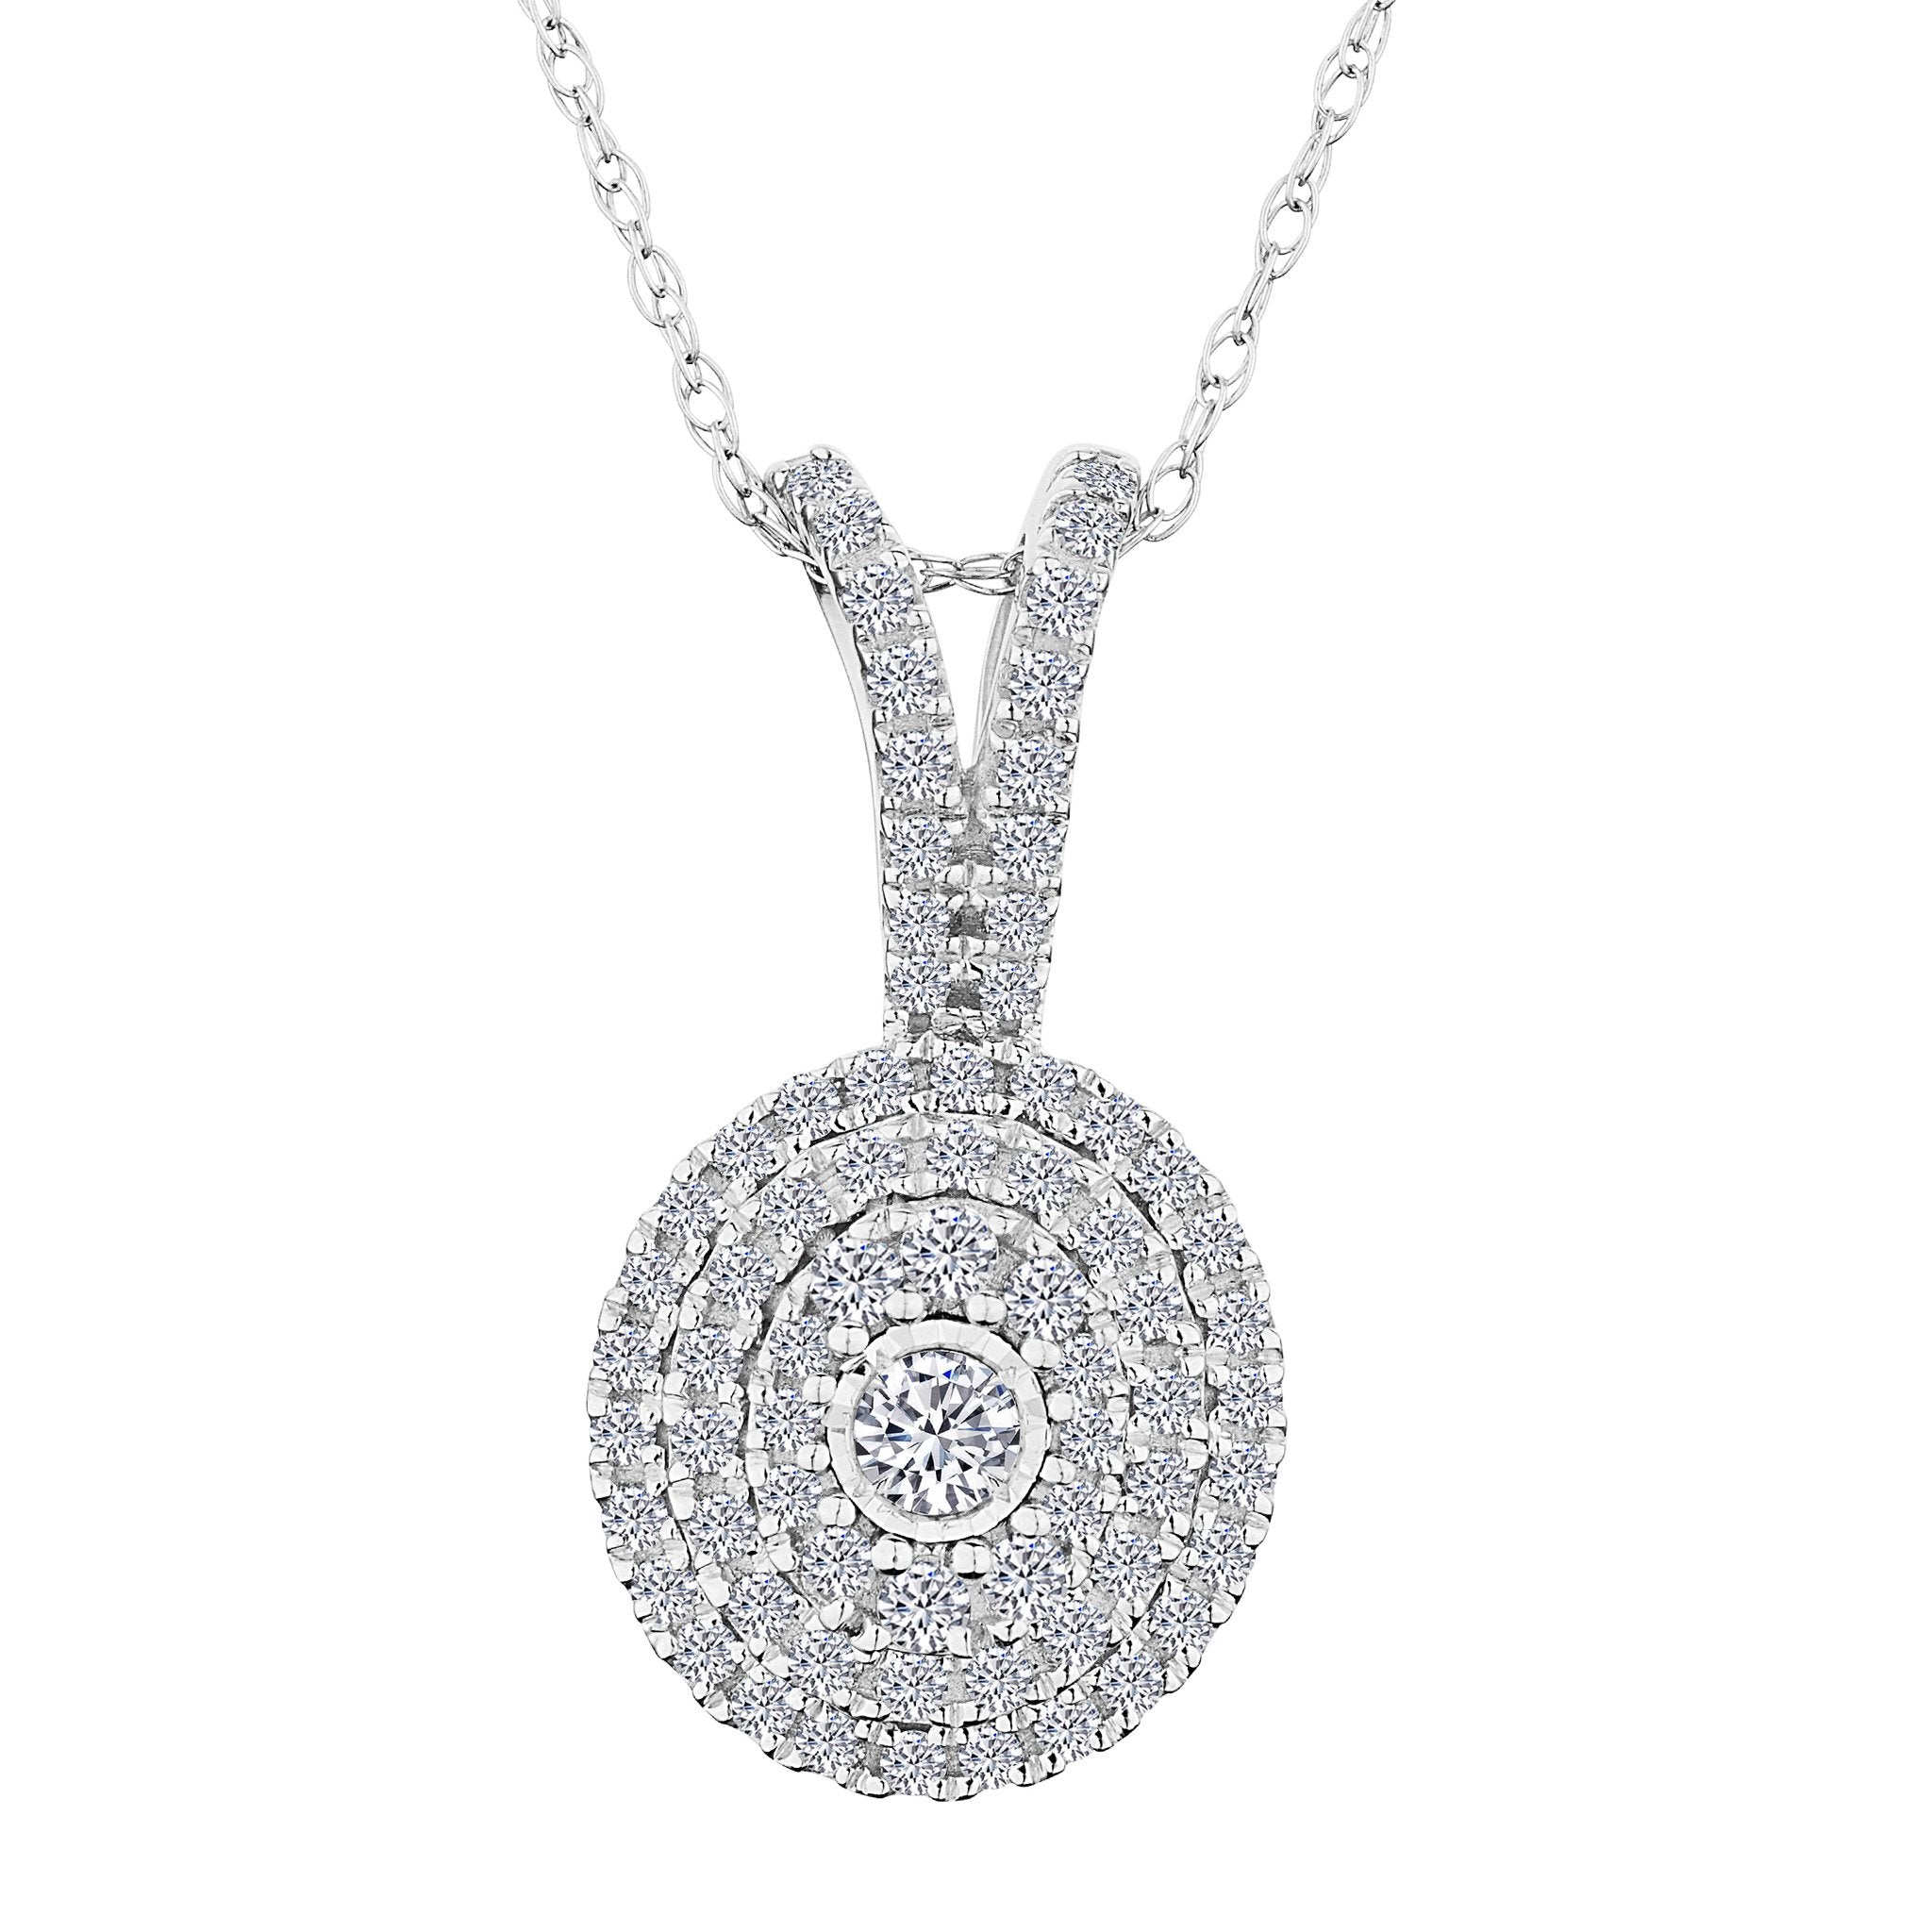 .33 Carat Diamond Pave Pendant With Halo,  10kt White Gold. Necklaces and Pendants. Griffin Jewellery Designs. 